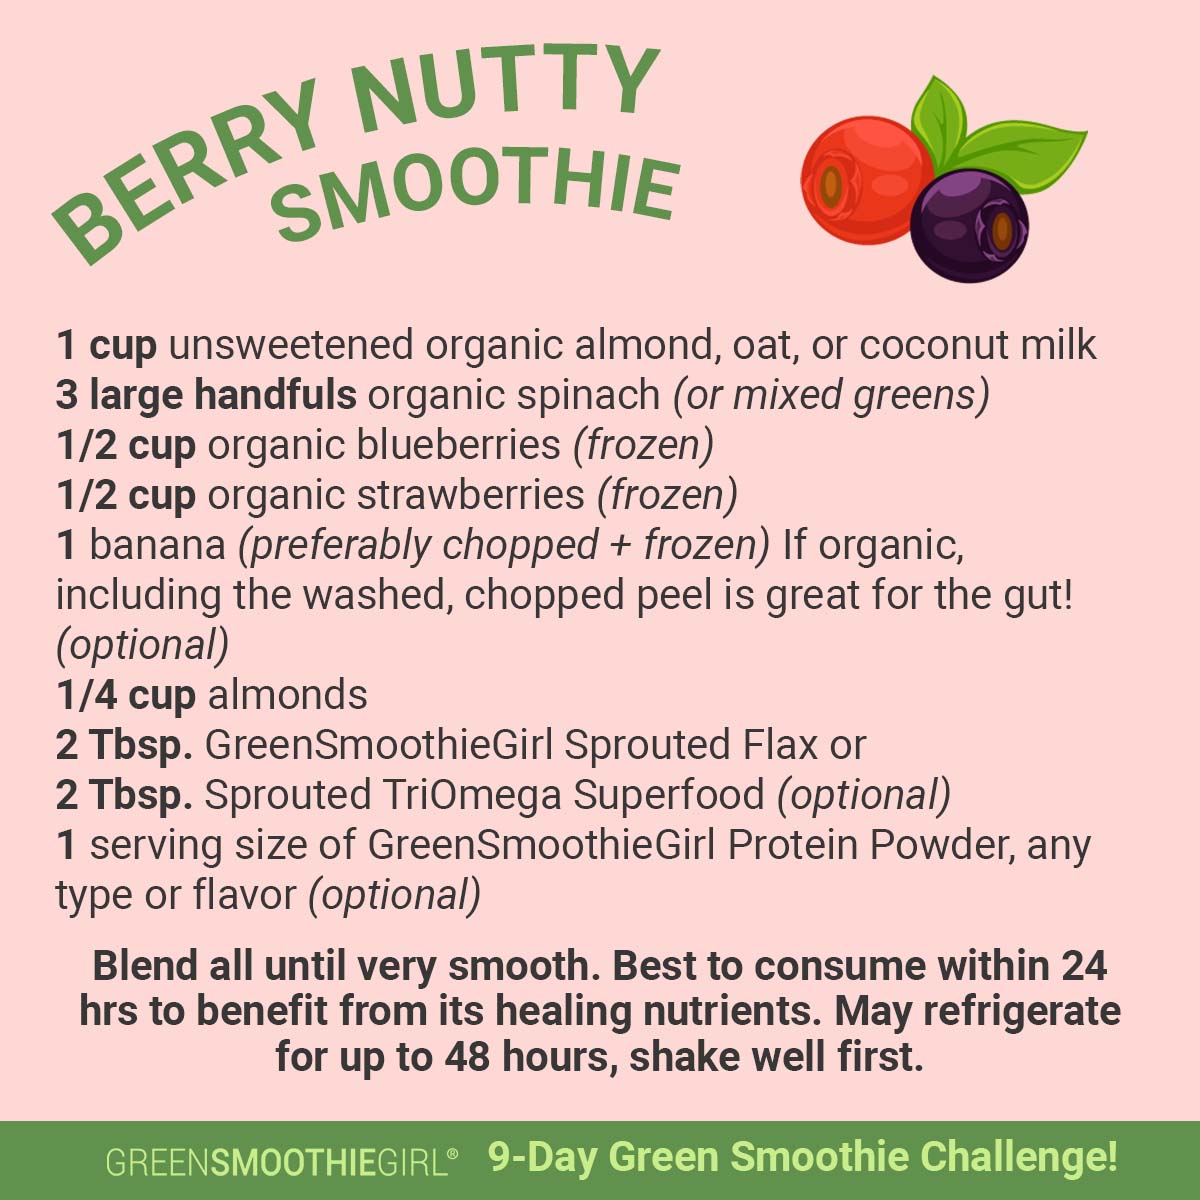 NUTTY Q,g%:moomls 1 cup unsweetened organic almond, oat, or coconut milk 3 large handfuls organic spinach or mixed greens 12 cup organic blueberries frozen 12 cup organic strawberries frozen 1 banana preferably chopped frozen If organic, including the washed, chopped peel is great for the gut! optional 14 cup almonds 2 Thsp. GreenSmoothieGirl Sprouted Flax or 2 Thsp. Sprouted TriOmega Superfood optional 1 serving size of GreenSmoothieGirl Protein Powder, any type or flavor optional Blend all until very smooth. Best to consume within 24 hrs to benefit from its healing nutrients. May refrigerate for up to 48 hours, shake well first. THIEGIRL 9-Day Smoothie Challenge! 